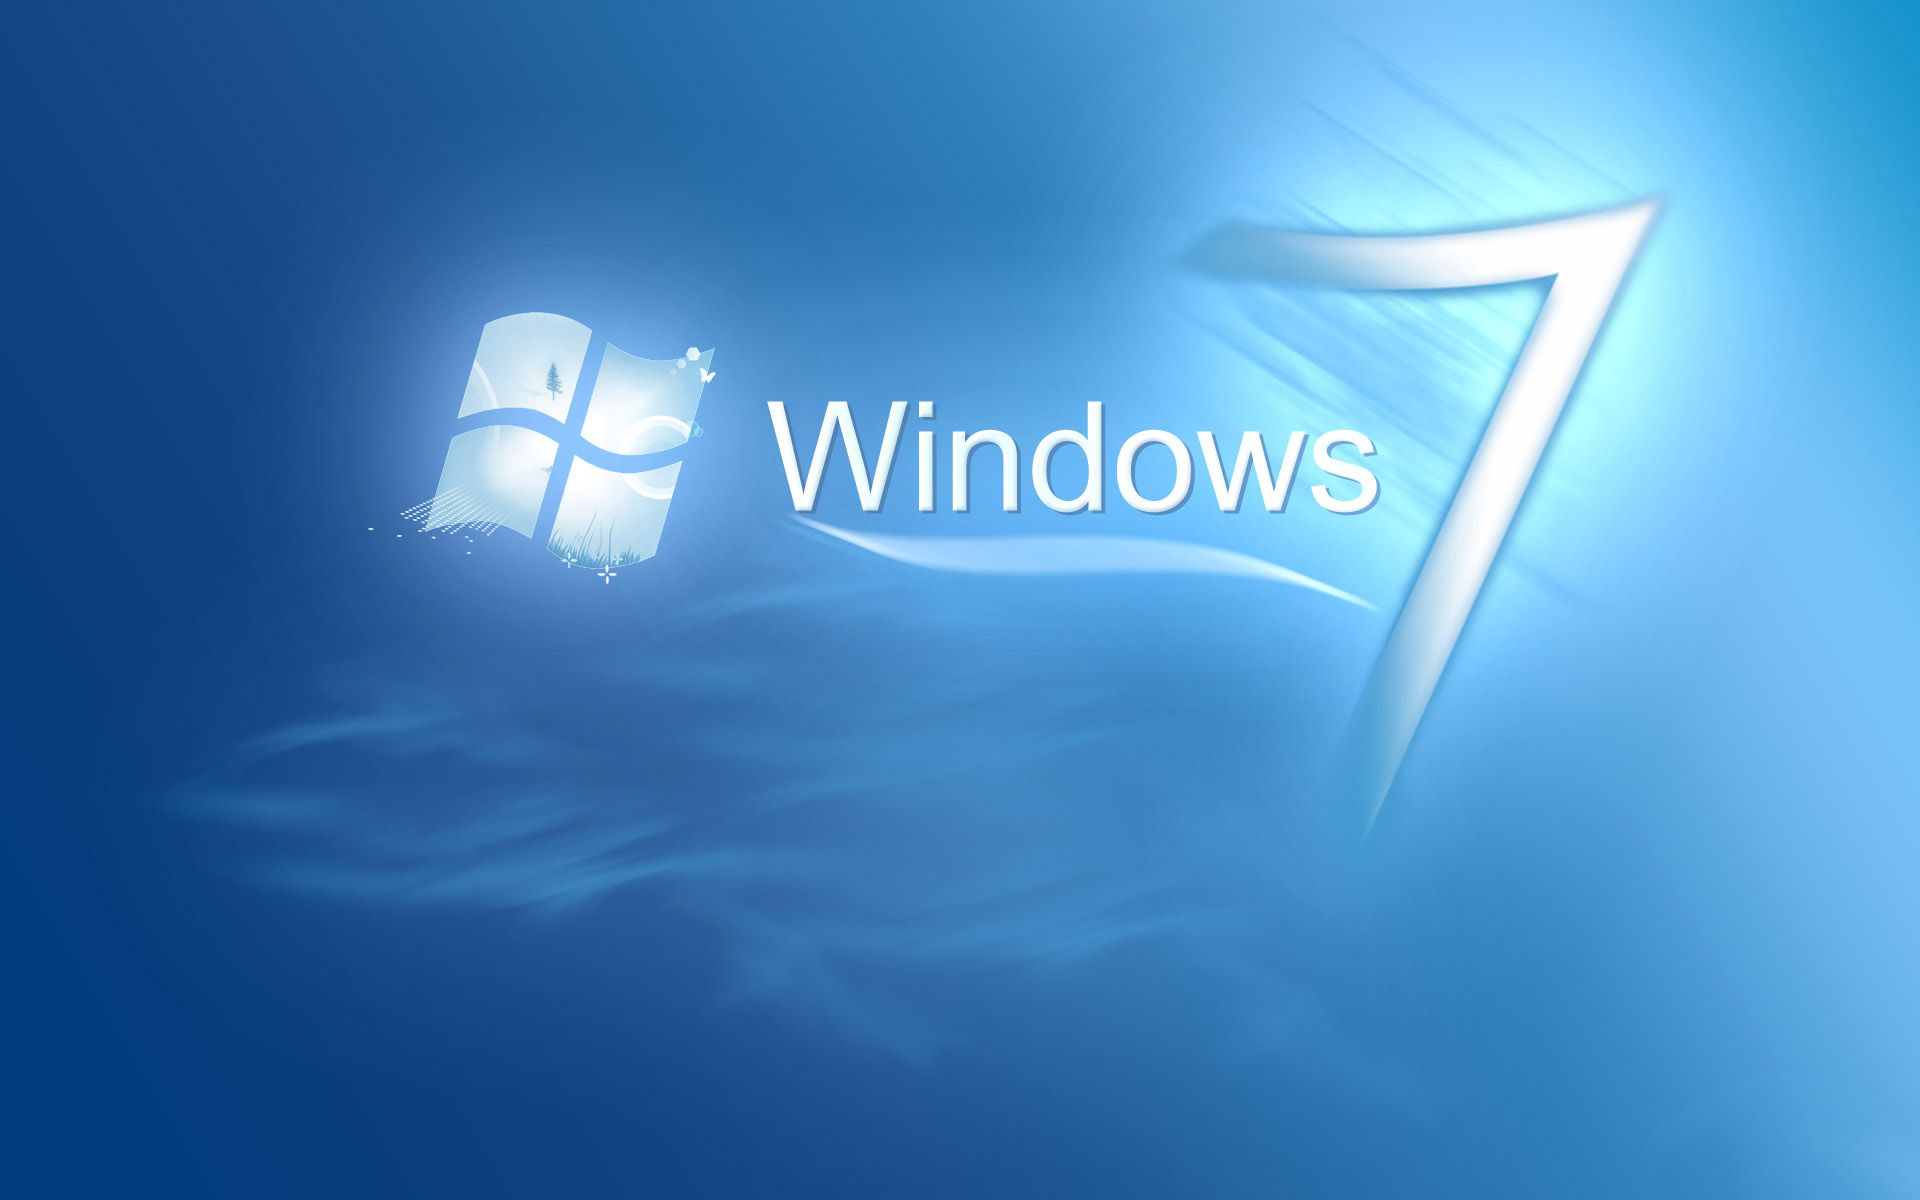 Windows HD Cool Wallpaper Image Blue Projects To